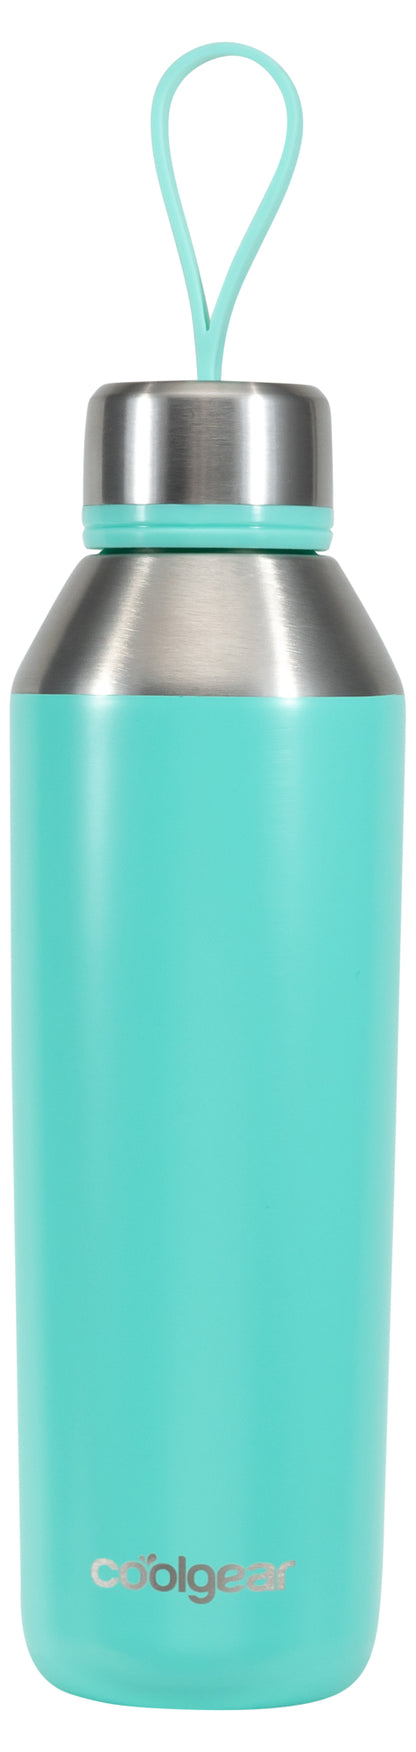 Cool Gear 2-Pack Stainless Steel Double Walled Vacuum Insulated Tyler Water Bottle, with Threaded Loop Lid, 17 Ounce